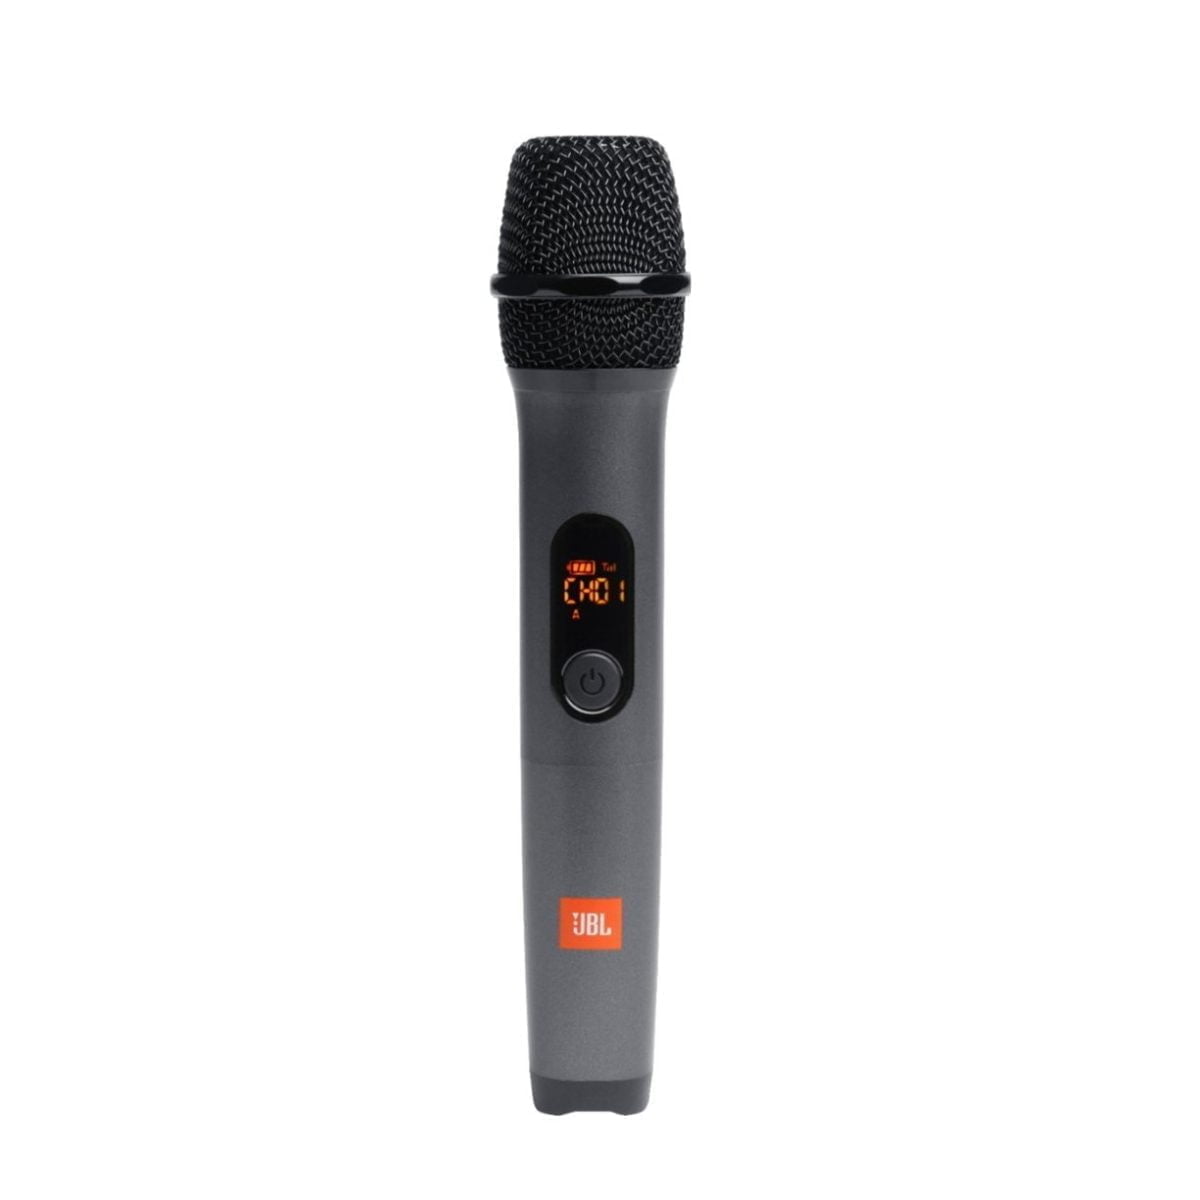 6426699Cv32D &Lt;H1 Class=&Quot;Heading-5 V-Fw-Regular&Quot;&Gt;Jbl - Partybox On-The-Go Portable Party Speaker - Black&Lt;/H1&Gt; Take Your Party Anywhere And Sing Everywhere. From Beach Parties To Festivals, The Jbl Partybox On-The-Go Lets You See, Hear And Feel The Beat. Turn It Up Loud With 100 Watts Of Powerful Jbl Pro Sound, Synched To A Dazzling Light Show. Access Your Favorite Tunes With Bluetooth, Usb, Aux And Tws (True Wireless Stereo) Connectivity, Grab A Friend And Sing Your Hearts Out With The Jbl Wireless Mics, Or Use The Instrument Input To Play Along. With A Bottle Opener, Padded Shoulder Strap, Rechargeable Battery And Ipx4 Splash-Proof Protection, The Jbl Partybox On-The-Go Has Everything You Need To Get The Party Started—And Take It With You. Jbl Partybox Jbl Partybox On-The-Go Portable Party Speaker - Black